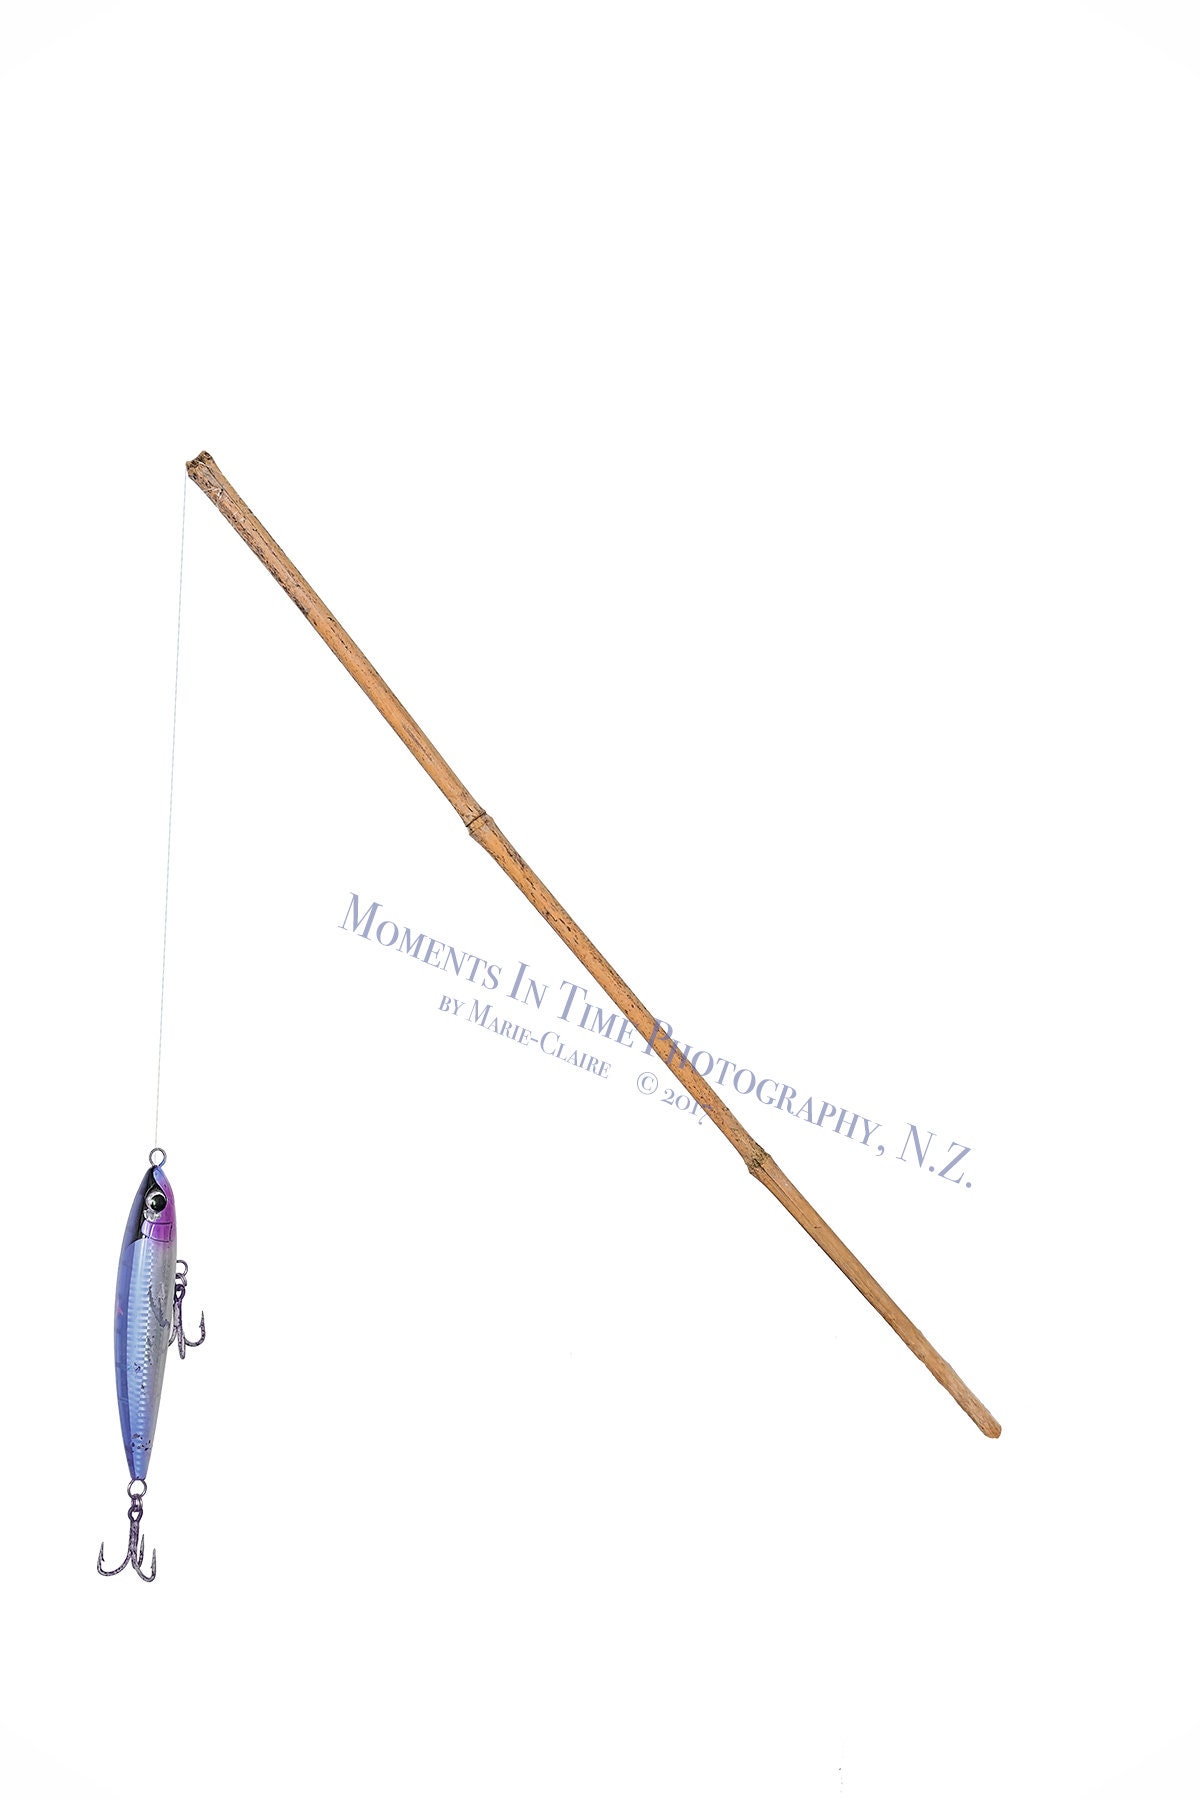 MIT Bamboo Fishing Rod 2 for the Price of One, Pink and Blue 